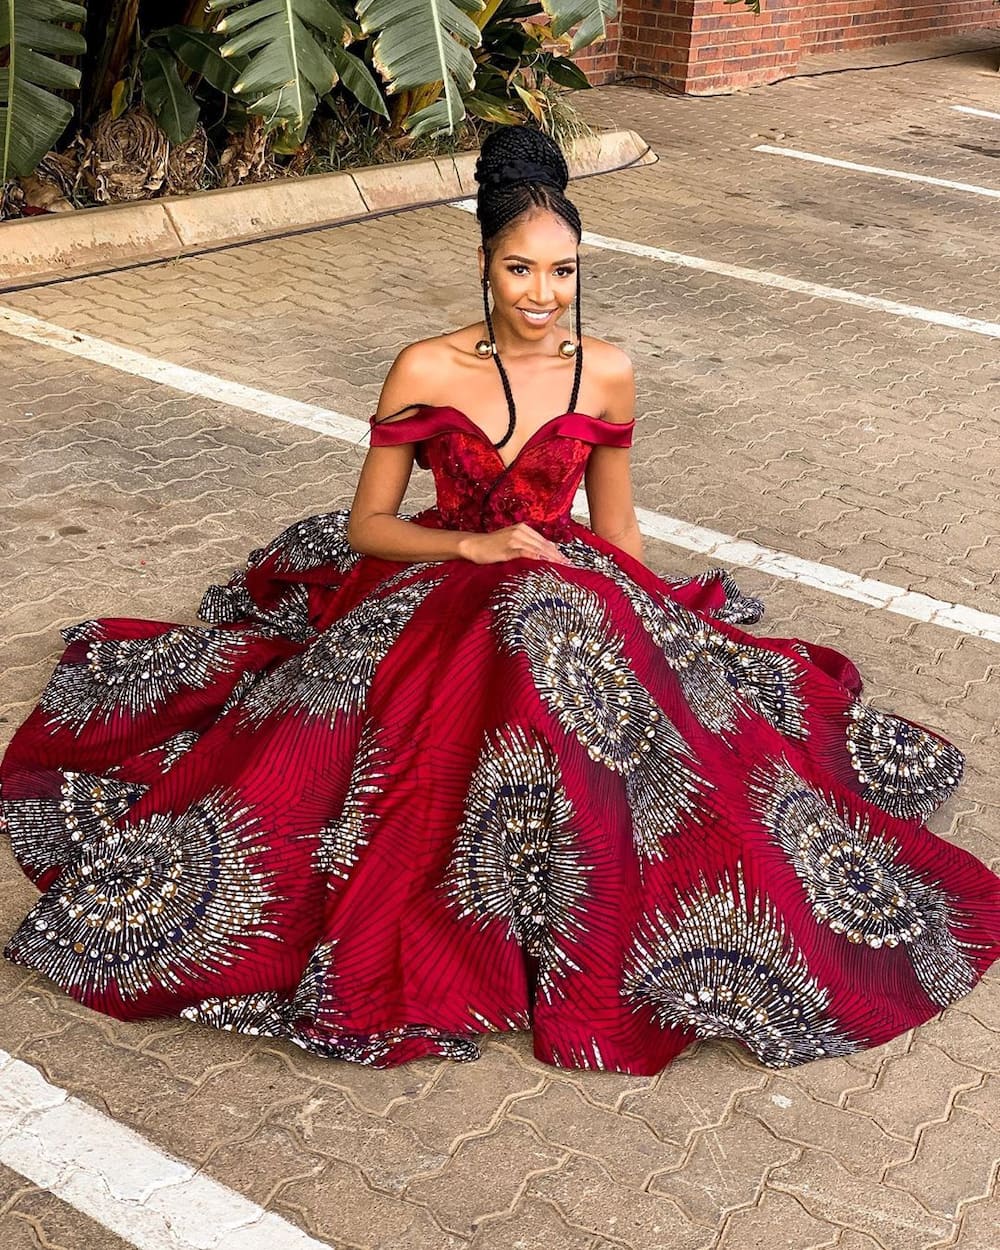 Blue Mbombo biography: real name, twin, boyfriend, family, modelling ...